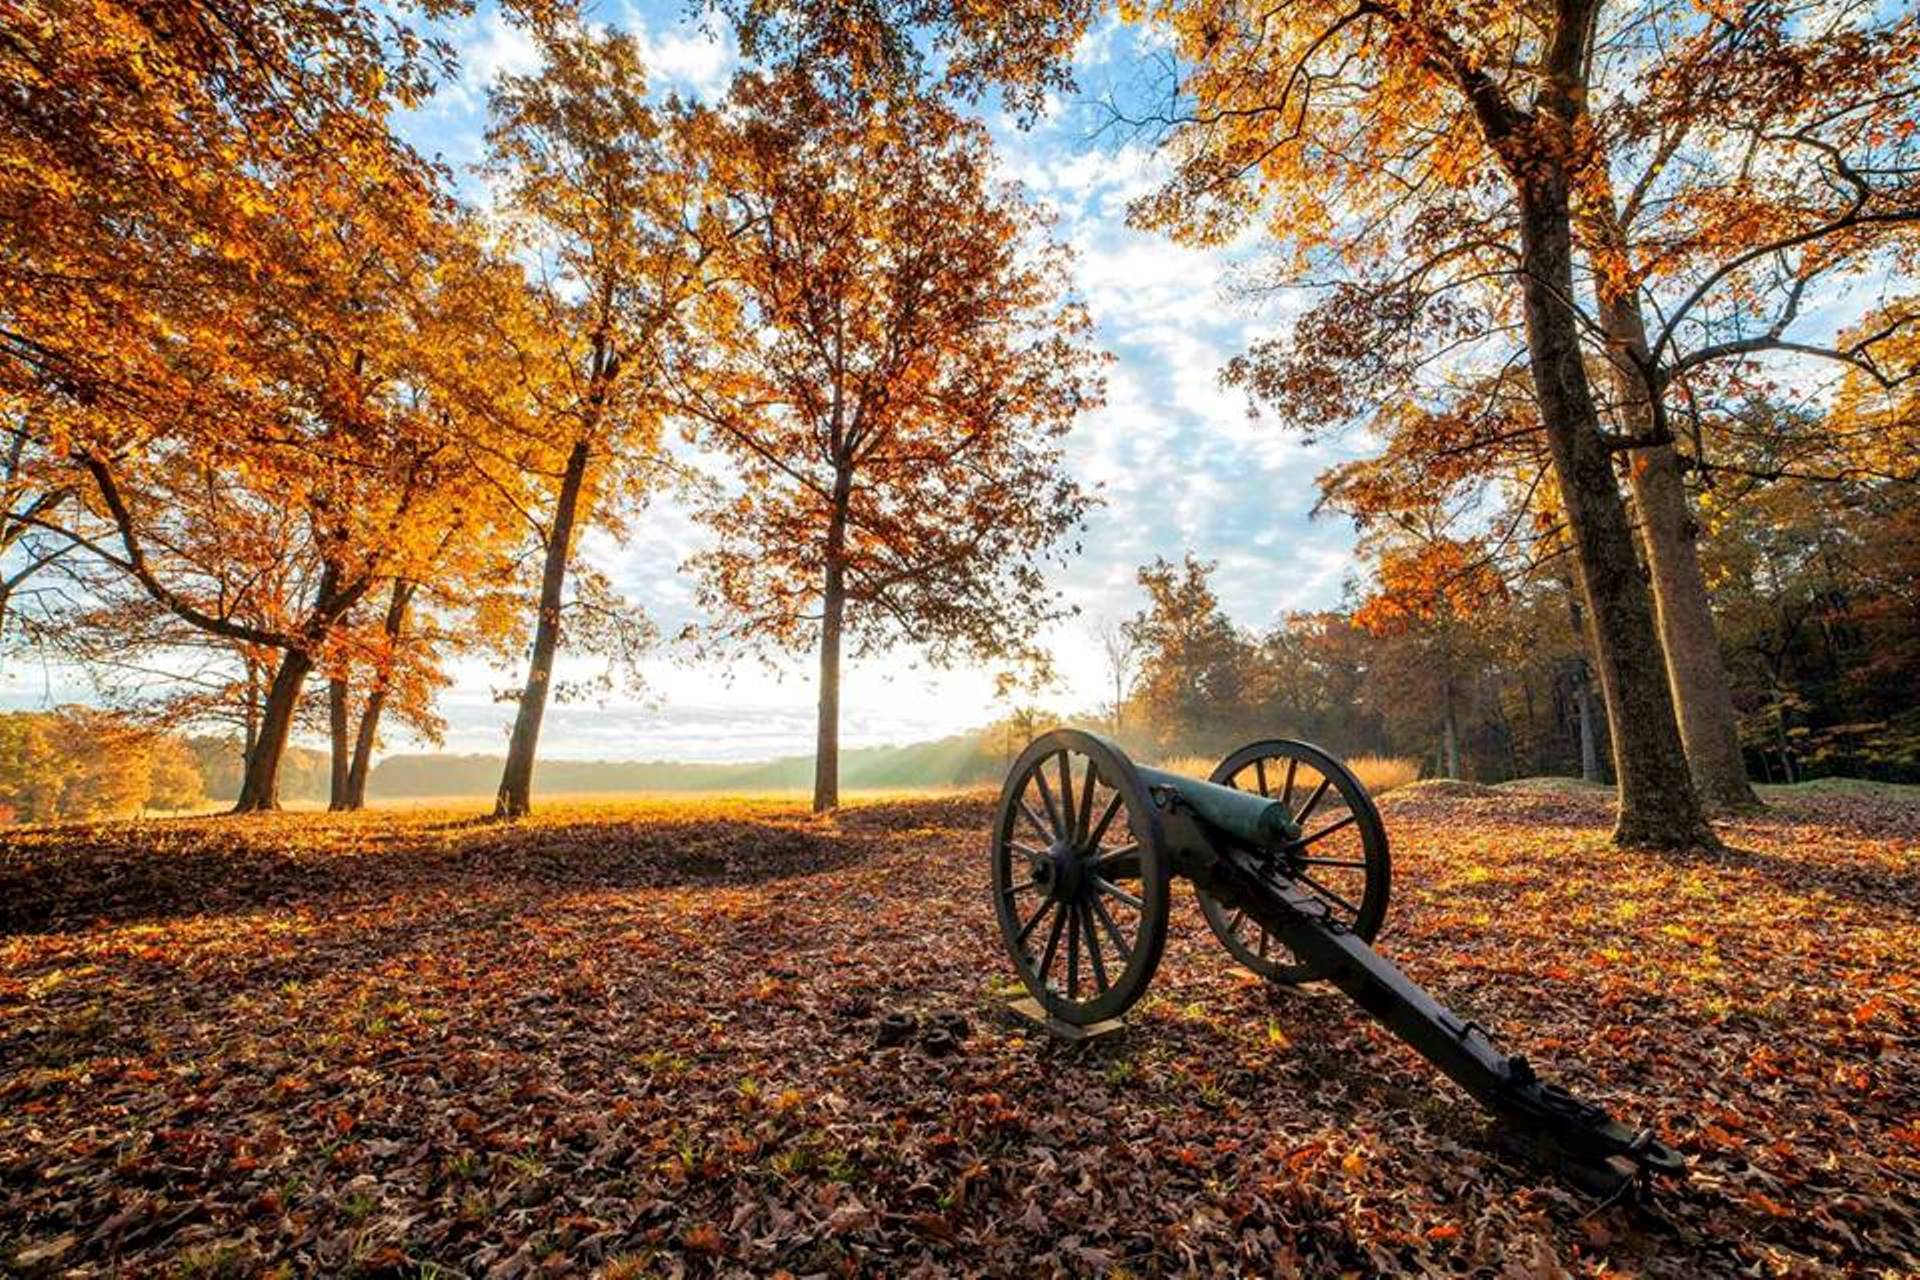 Field with cannon and earthworks covered in orange and golden leaves with trees showing fall colors